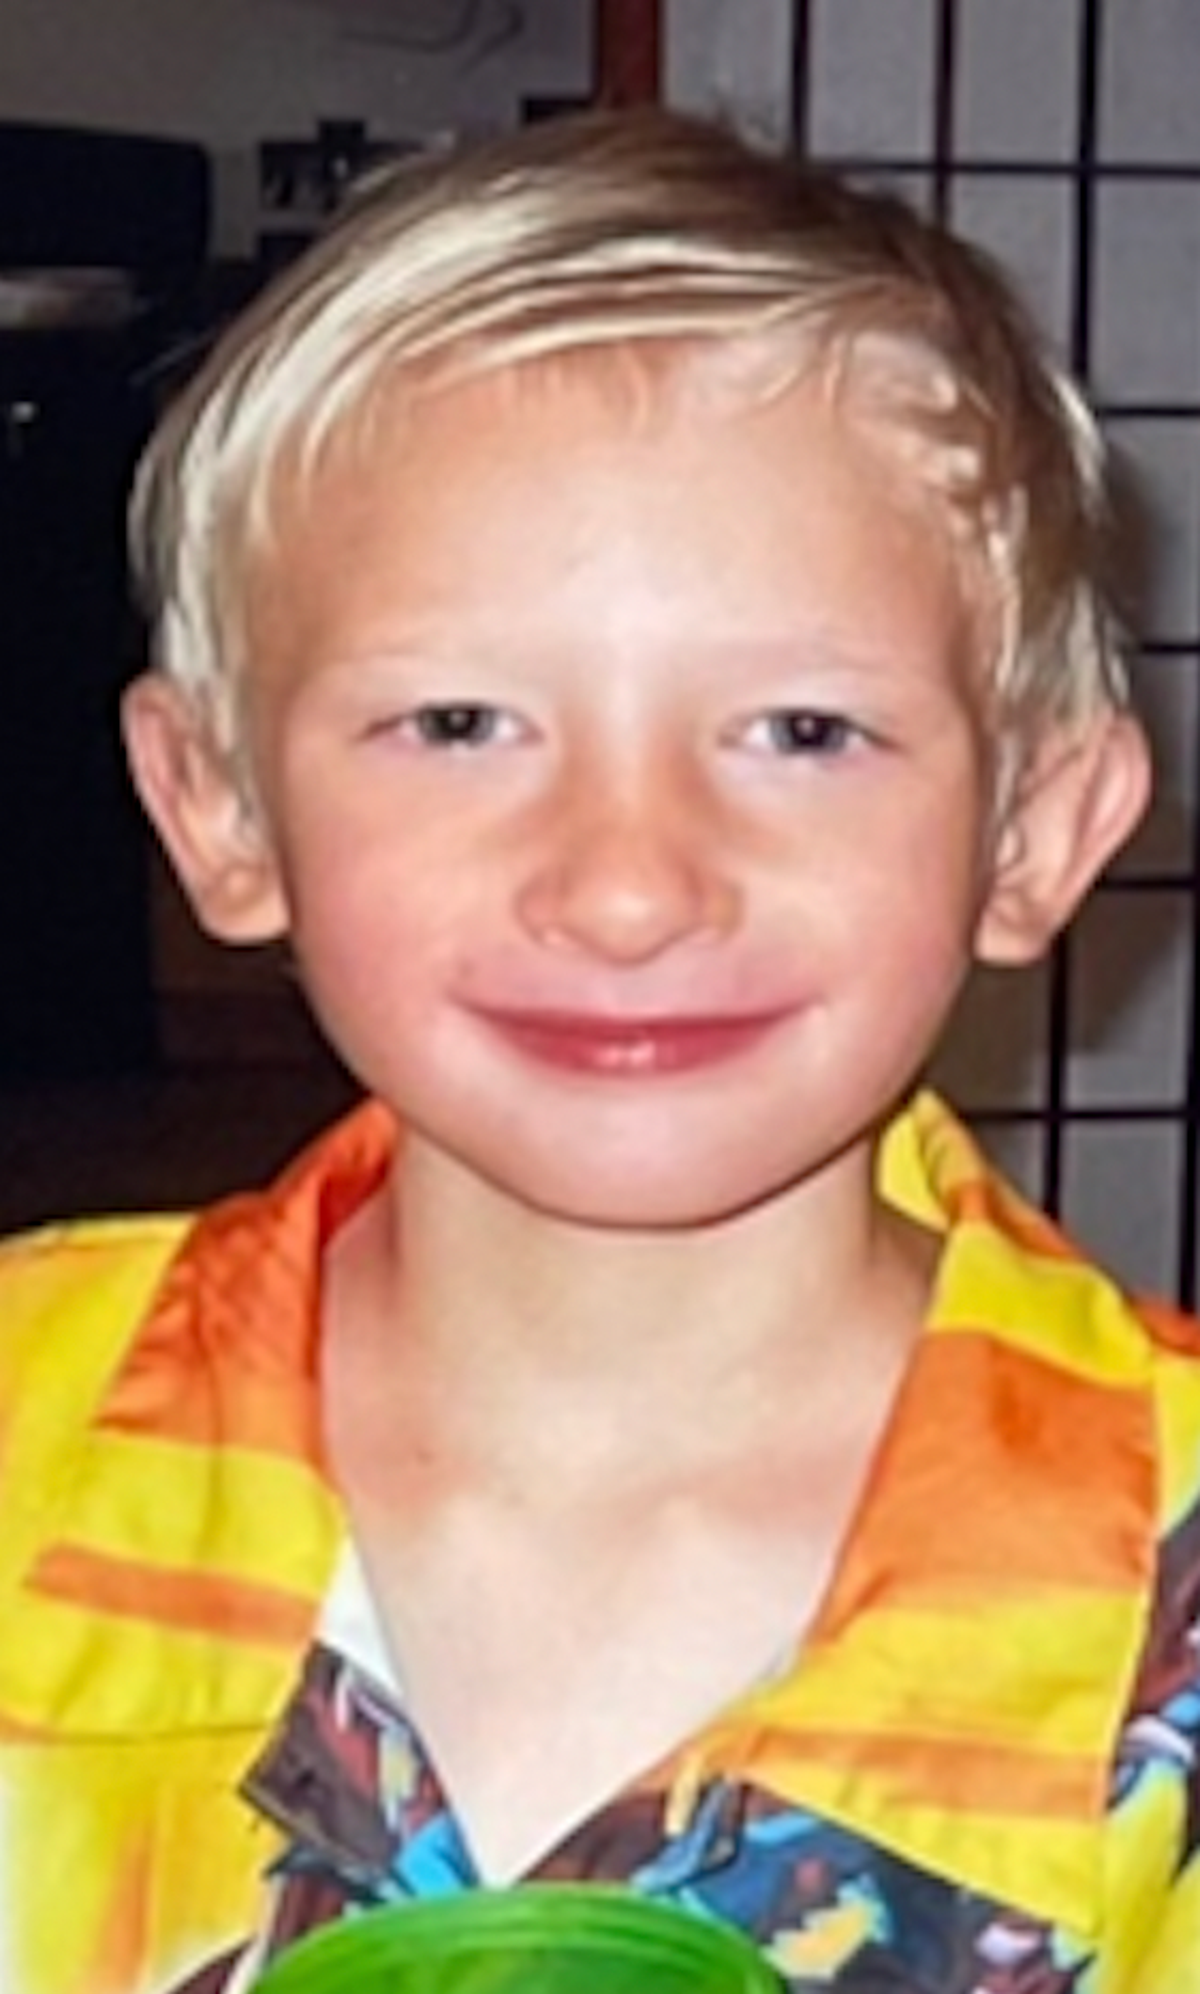 Blake Deven, pictured here in 2012, has not been seen since 2017 (FBI)